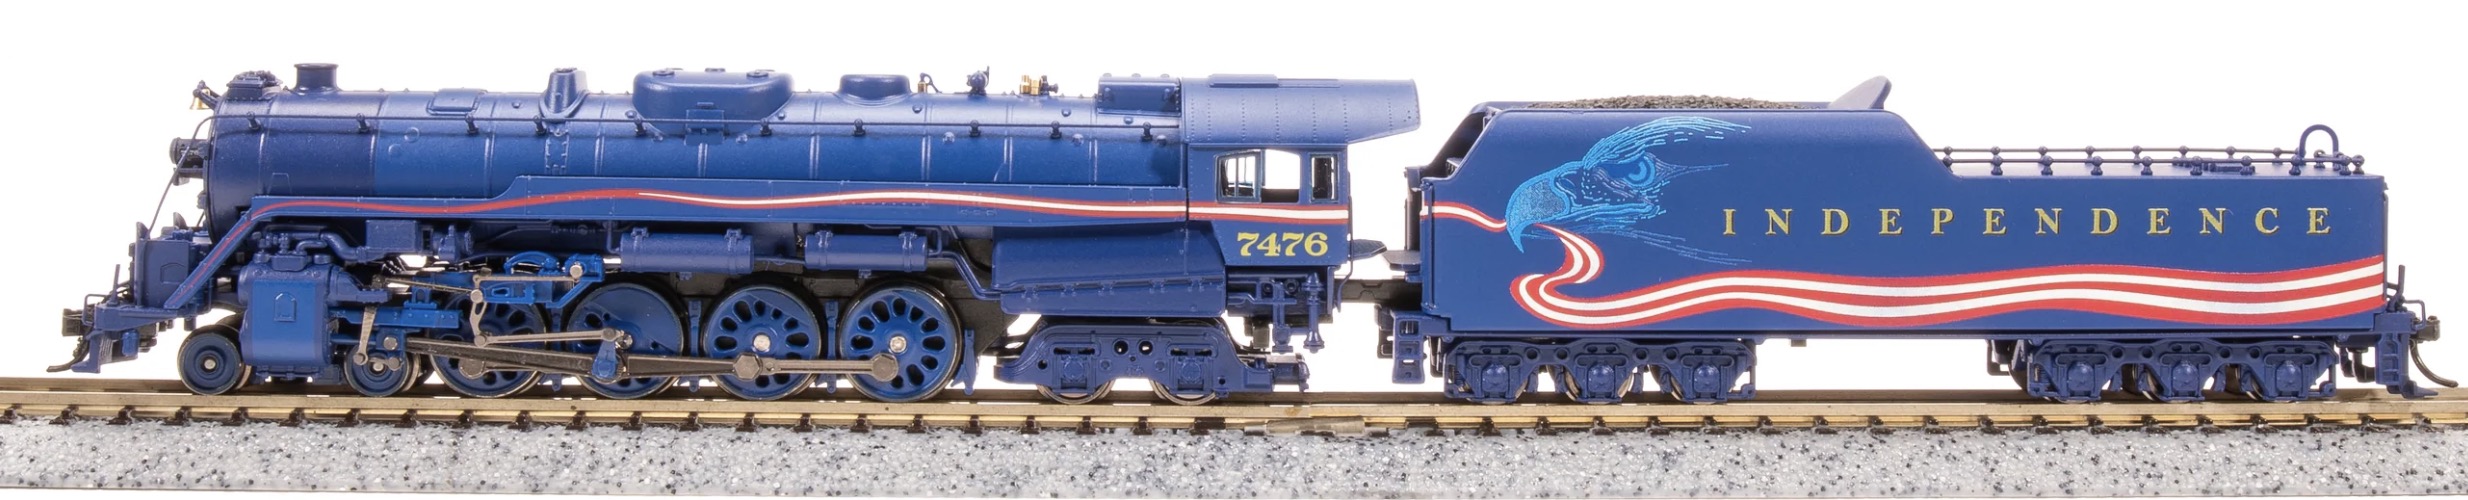 N Scale - Broadway Limited - 8249 - Locomotive, Steam, 4-8-4 T1 - Holiday Car - 7476